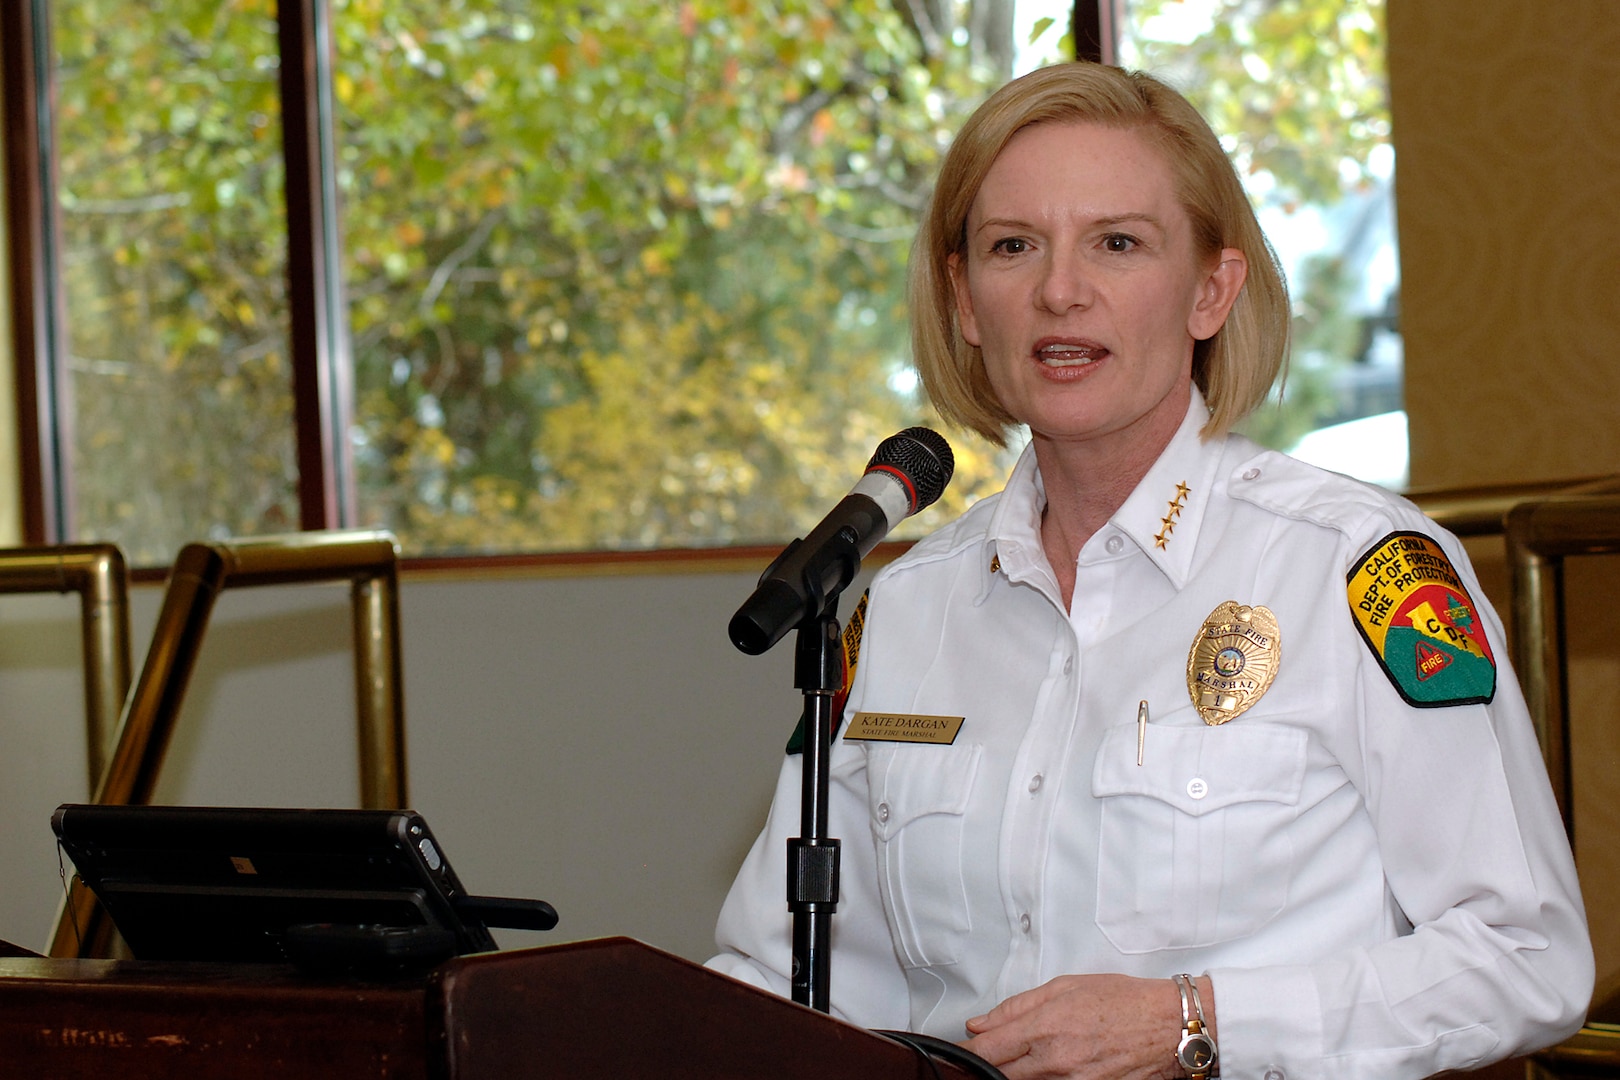 California state fire marshal, Chief Kate Dargan, speaks at the Defense Support of Civil Authorities Executive Seminar in Colorado Springs, Colo., on Nov. 6, 2007. Dargan credited U.S. Northern Command with being the "enabler" of recent wildfire fighting operations in Southern California. 